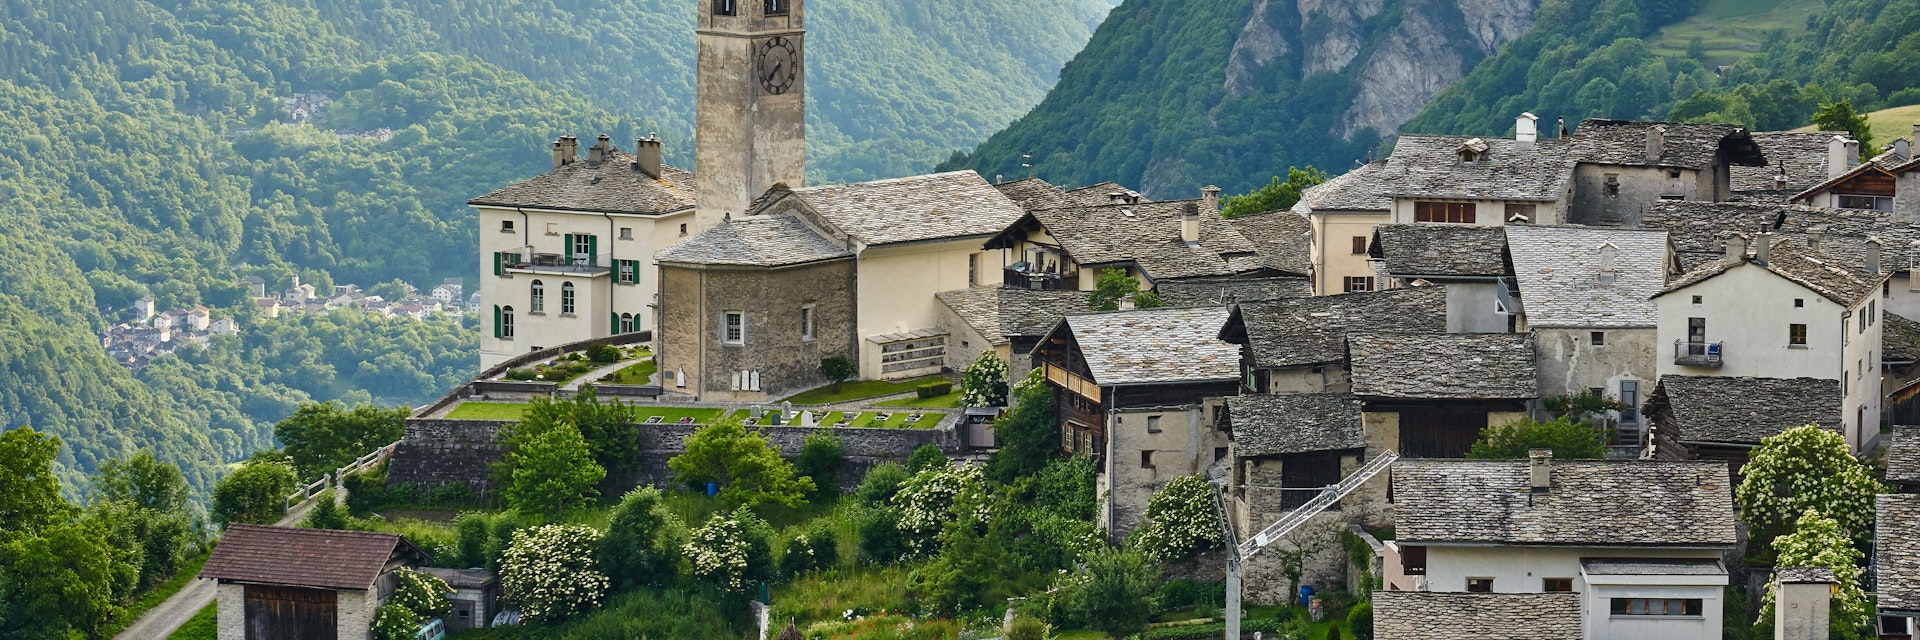 Church and old houses of mountain village Soglio, Switzerland.